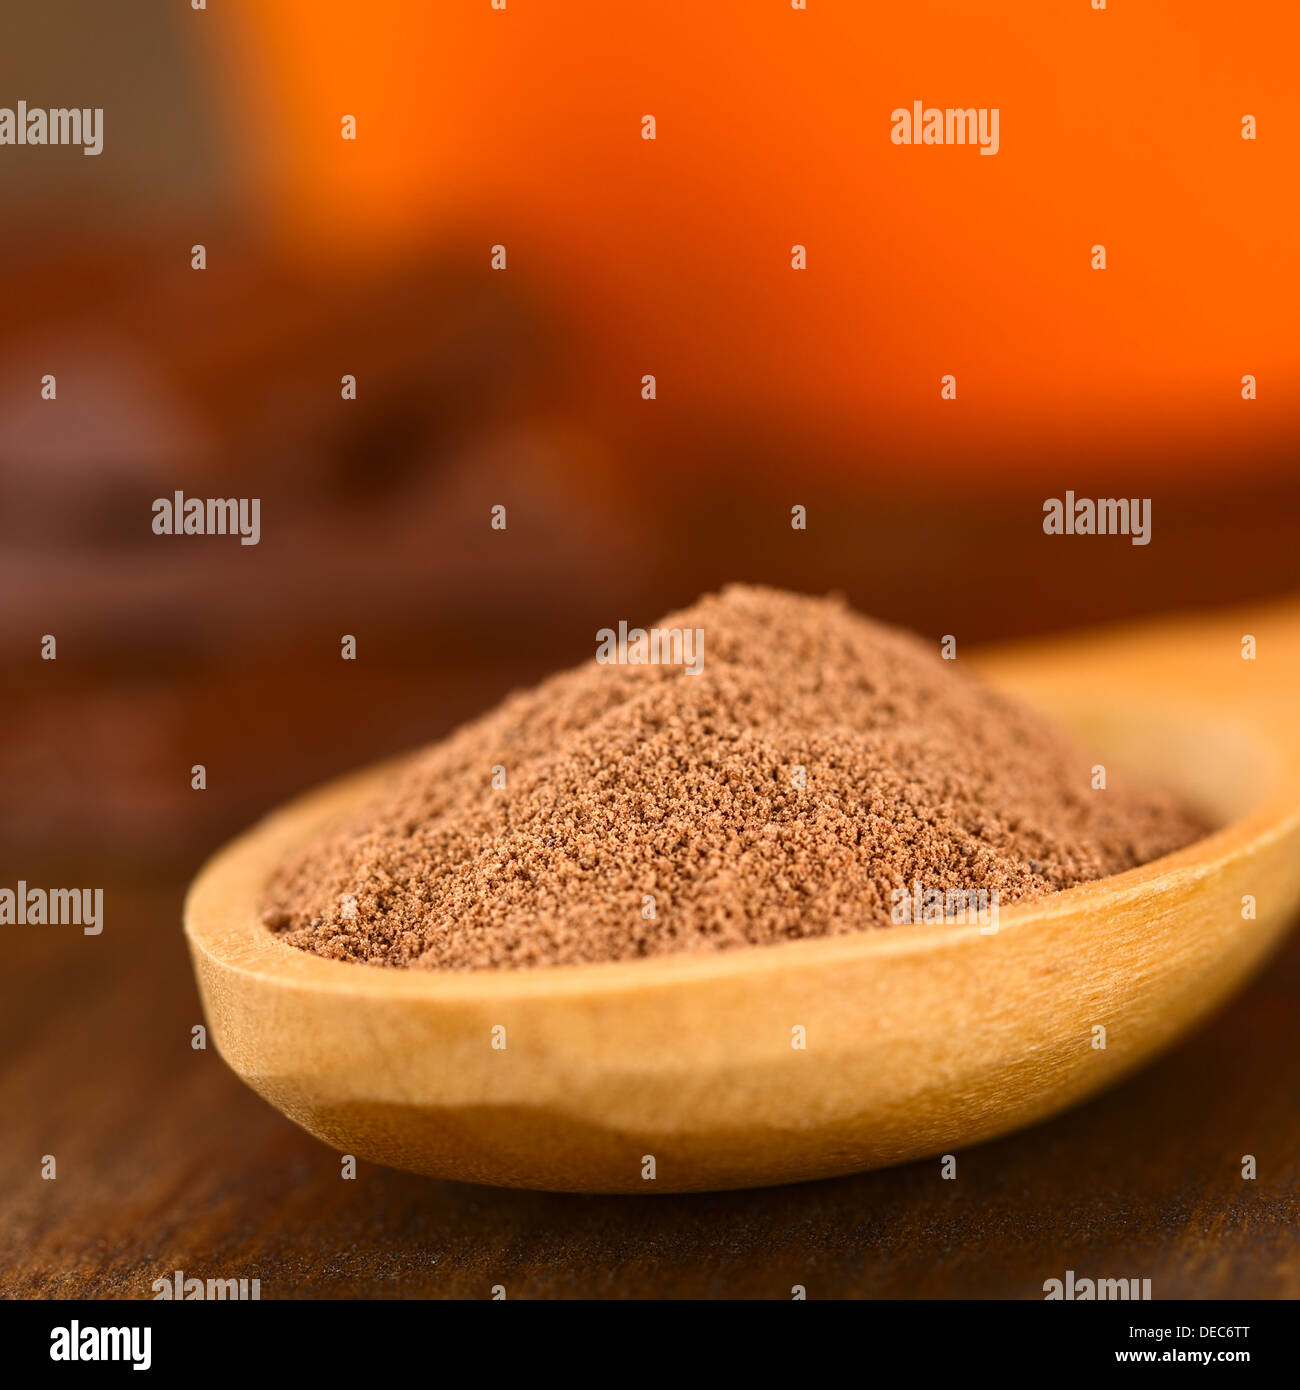 Cocoa powder on wooden spoon (Very Shallow Depth of Field, Focus one third into the cocoa) Stock Photo